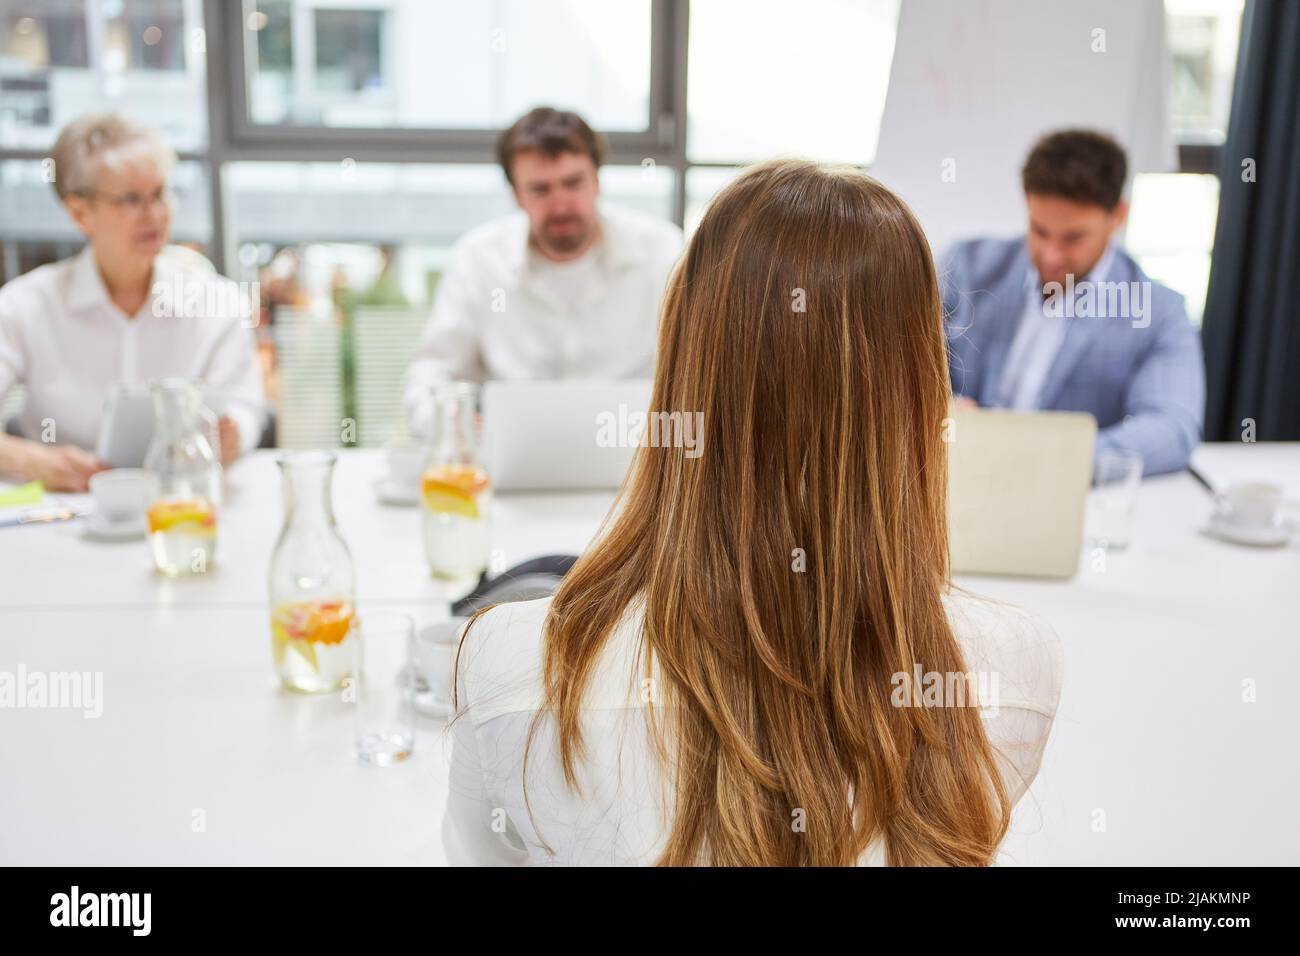 Young woman as an applicant at the interview with HR and manager Stock Photo